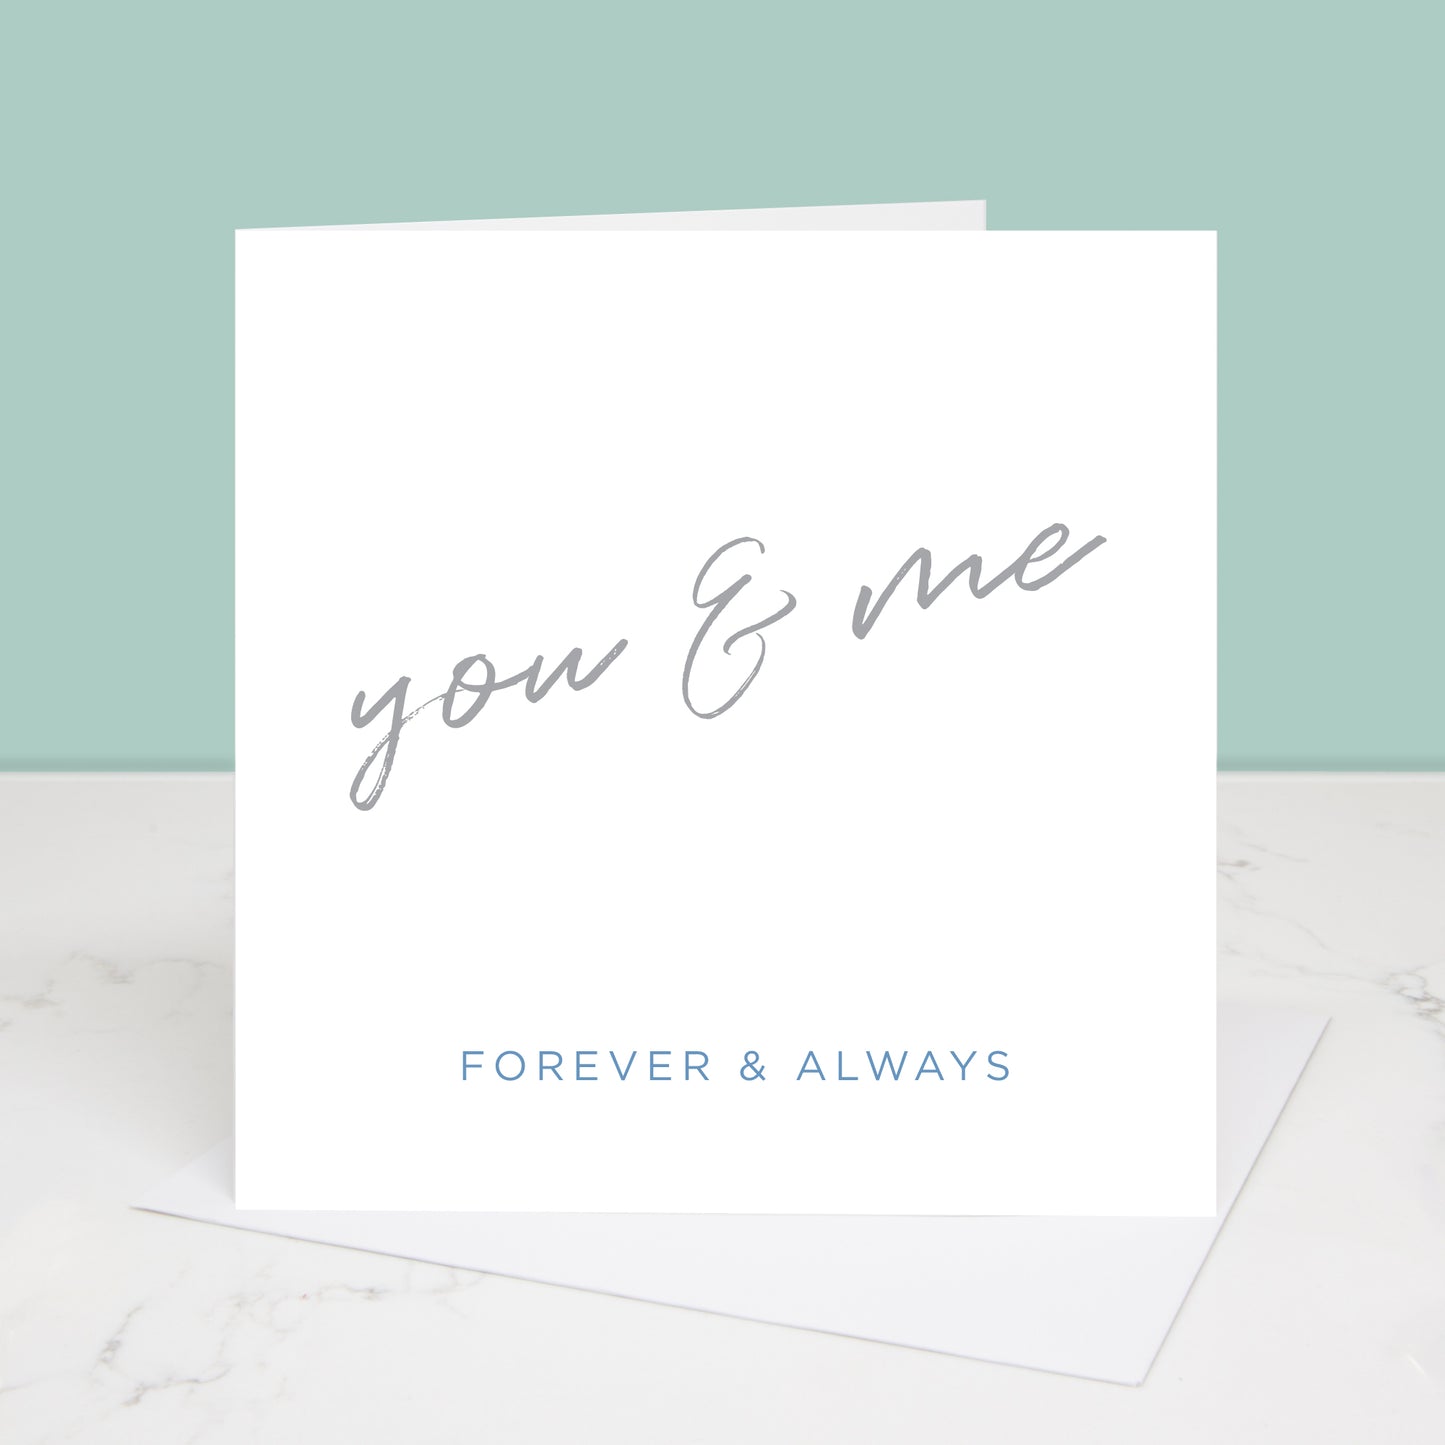 romantic greetings card You & Me forever and always. All images and designs © Slice of Pie Designs